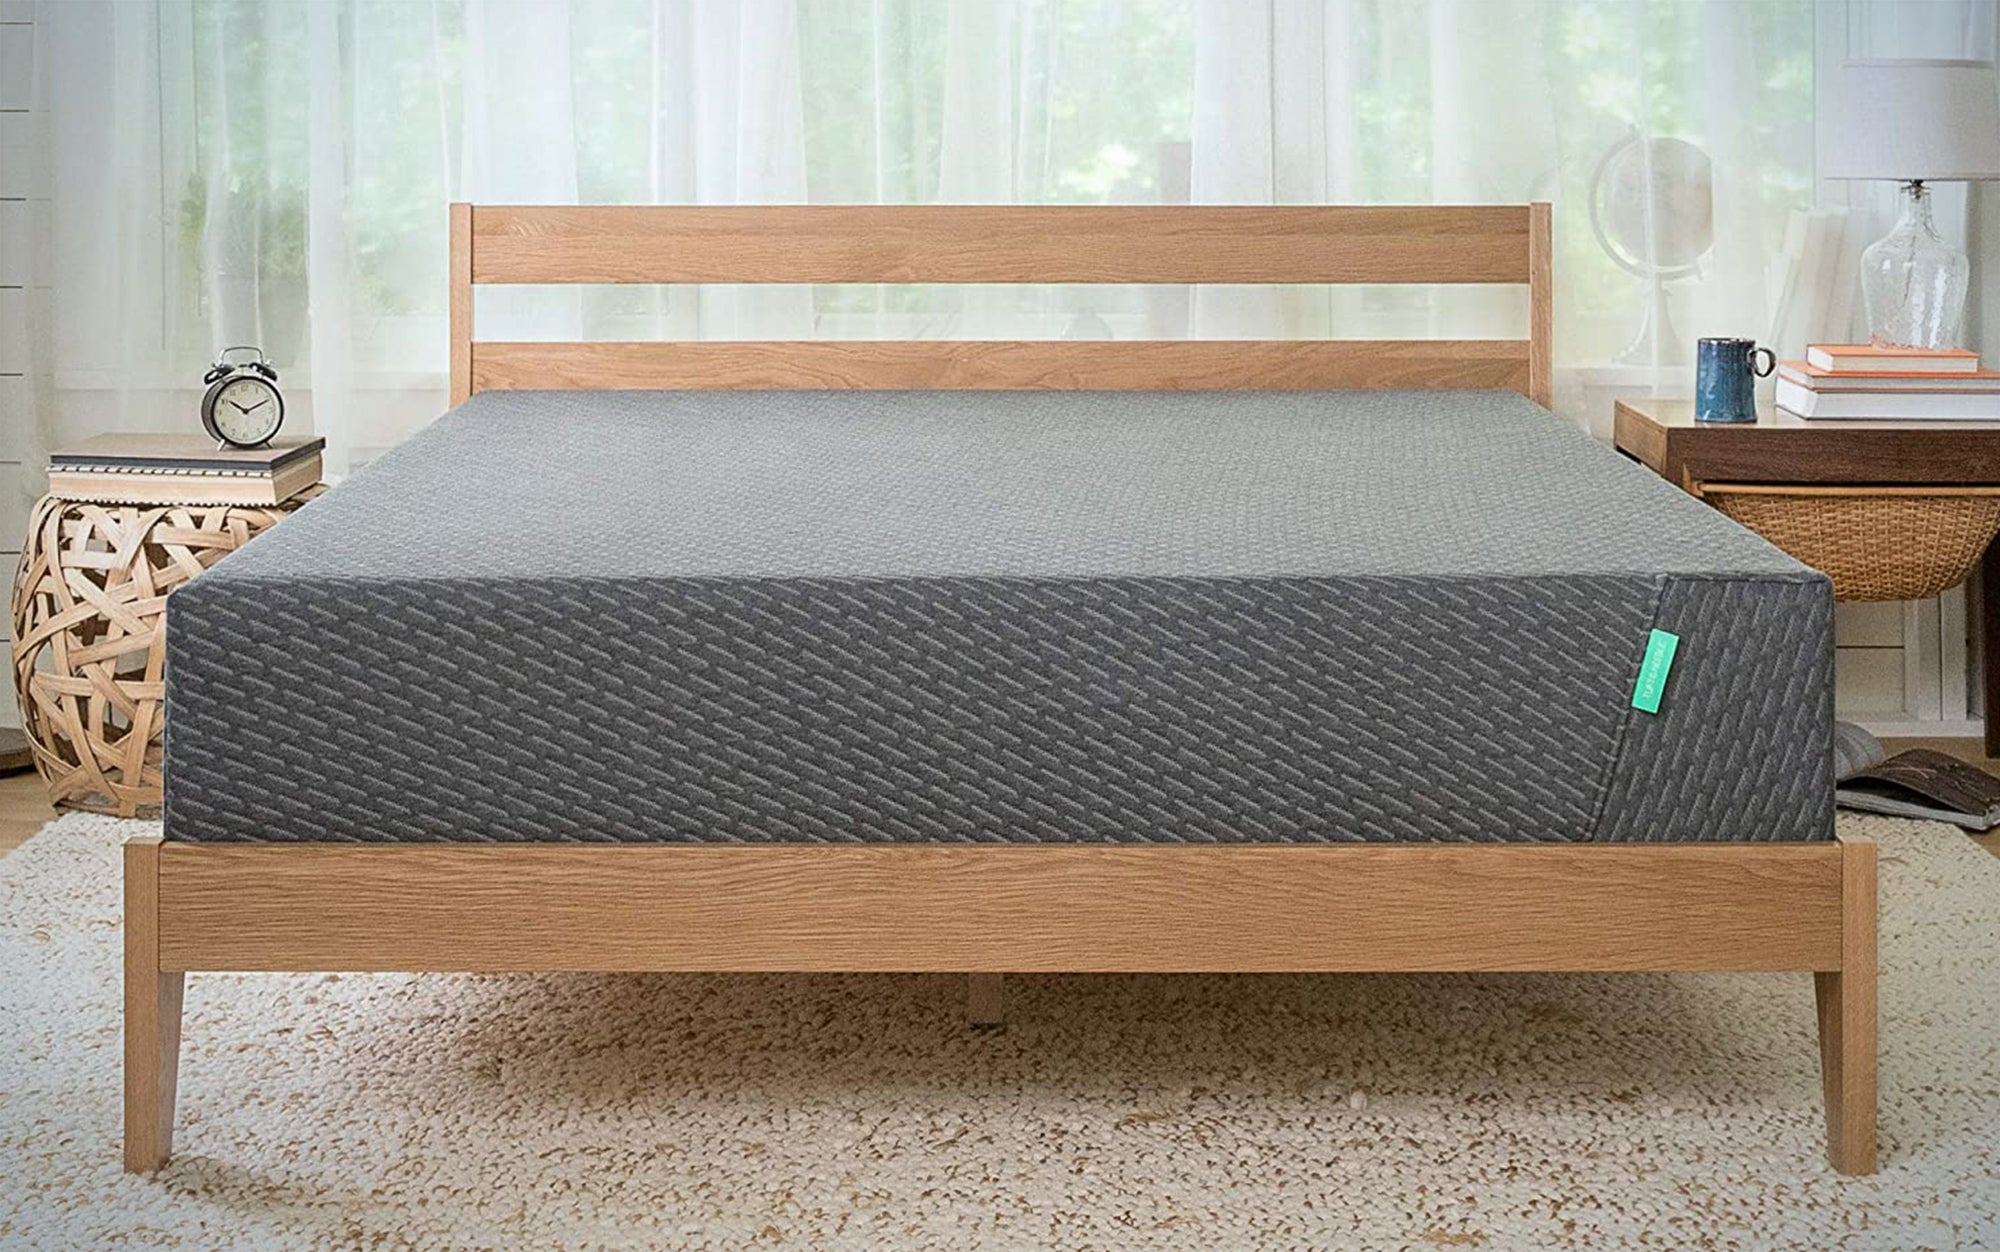 Tuft & Needle Mint Queen Mattress - Extra Cooling Adaptive Foam with Ceramic Gel Beads and Edge Support - Supportive Pressure Relief is the best memory foam mattress.